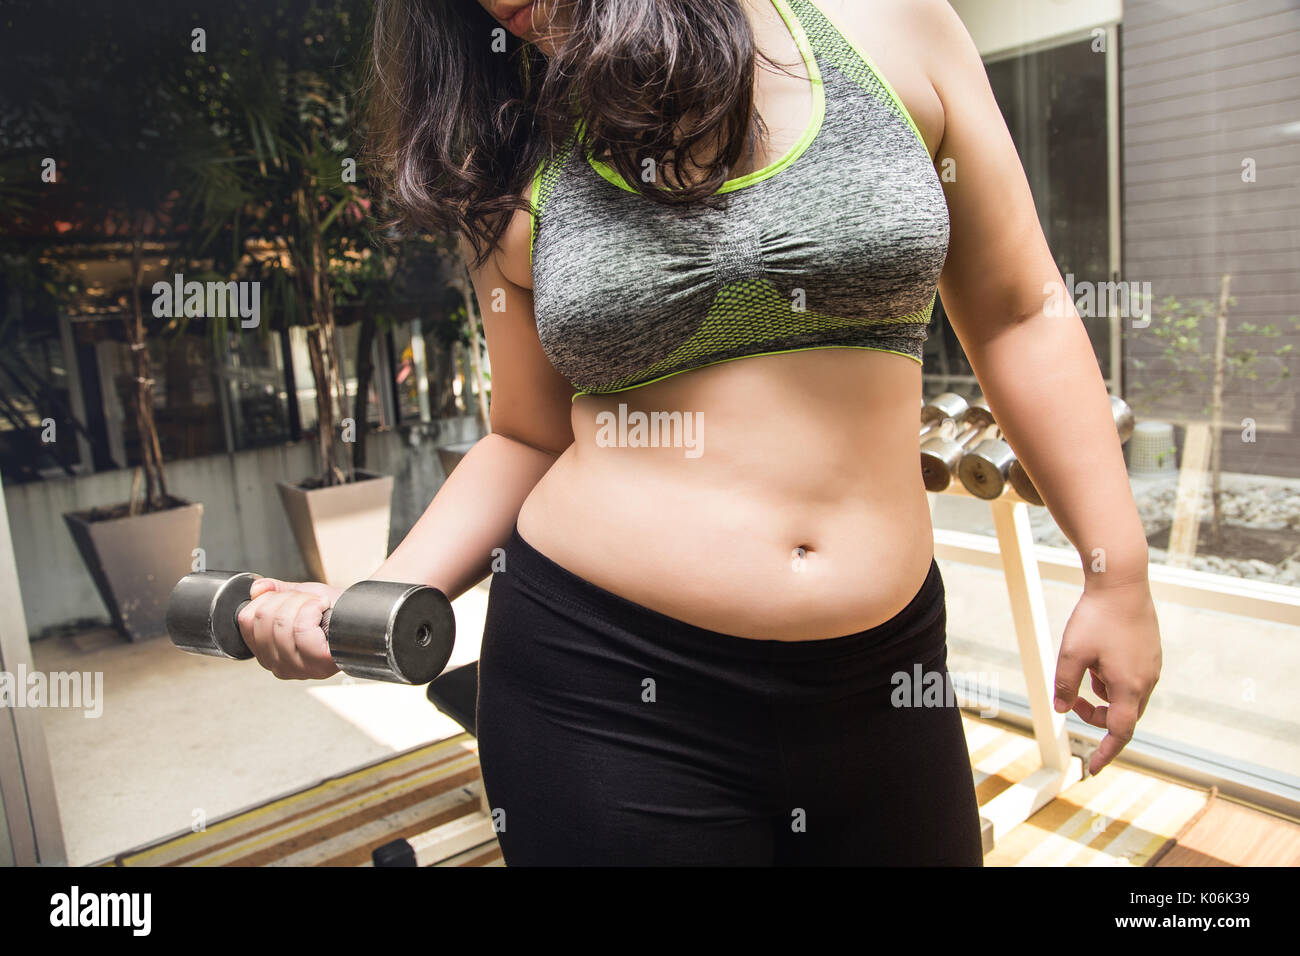 Fat woman weight loss lifting dumbbell in fitness gym Stock Photo